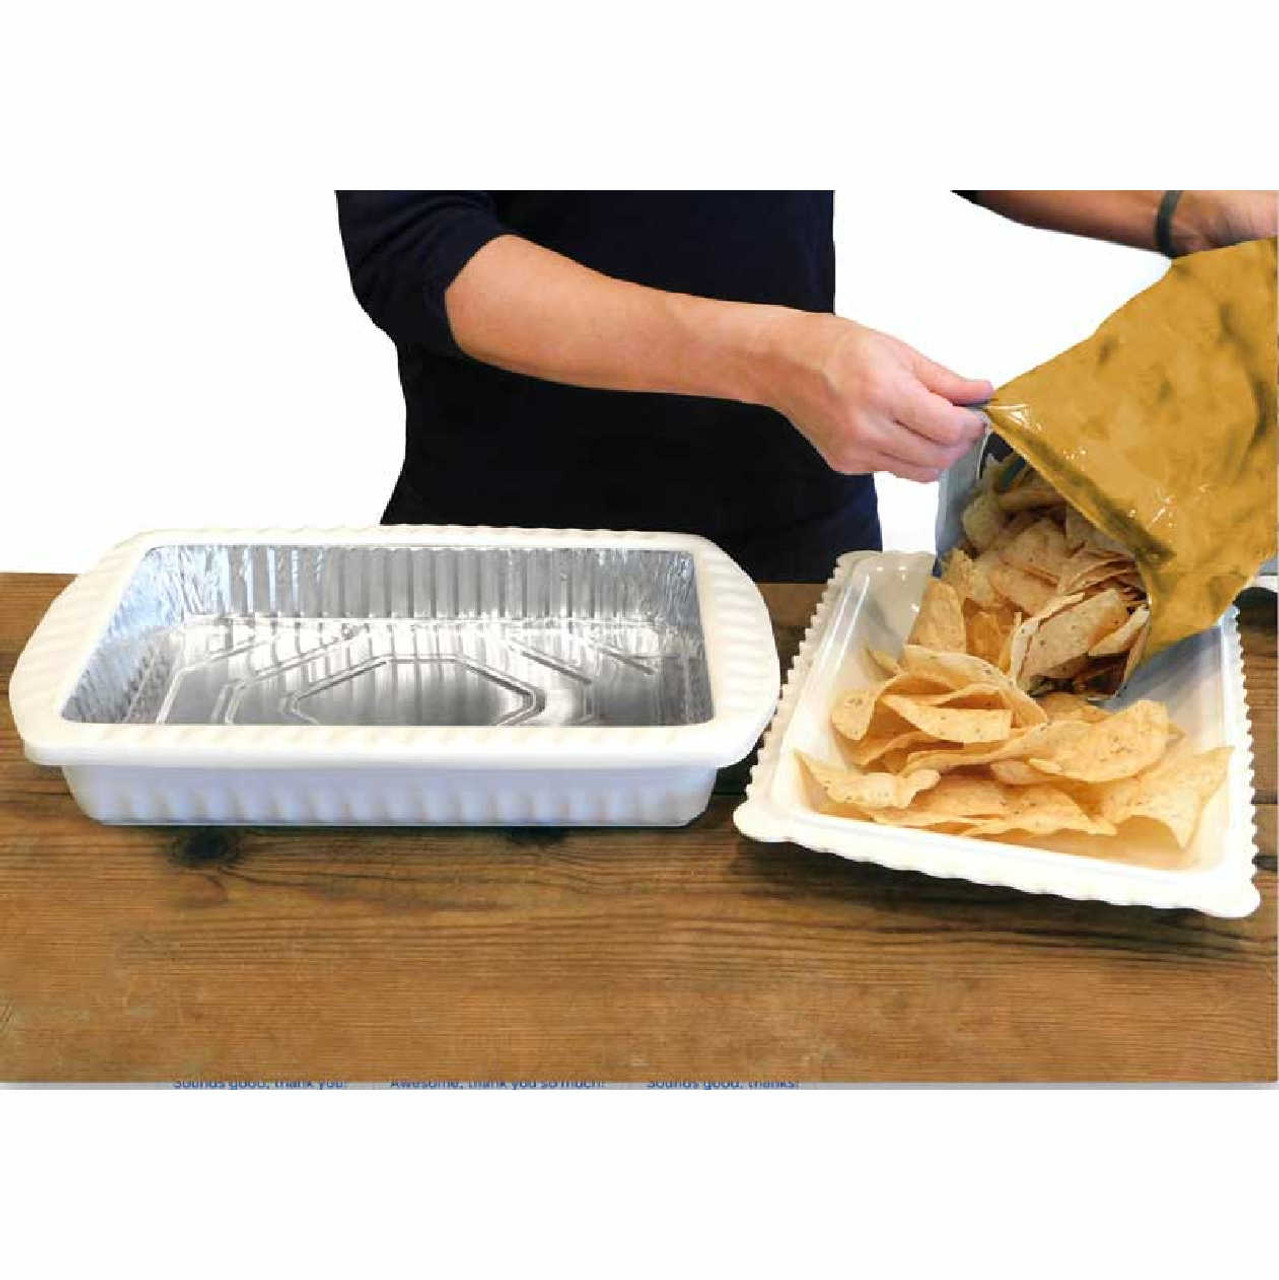  Foil Decor Serving Carrier for 9x13x2 Foil Pans, Heat Resistant  w/Handles, Lid Locks in Place for Safe and Easy Carrying, Lid Doubles as a  Serving Dish, 1 Foil Pan included, BPA